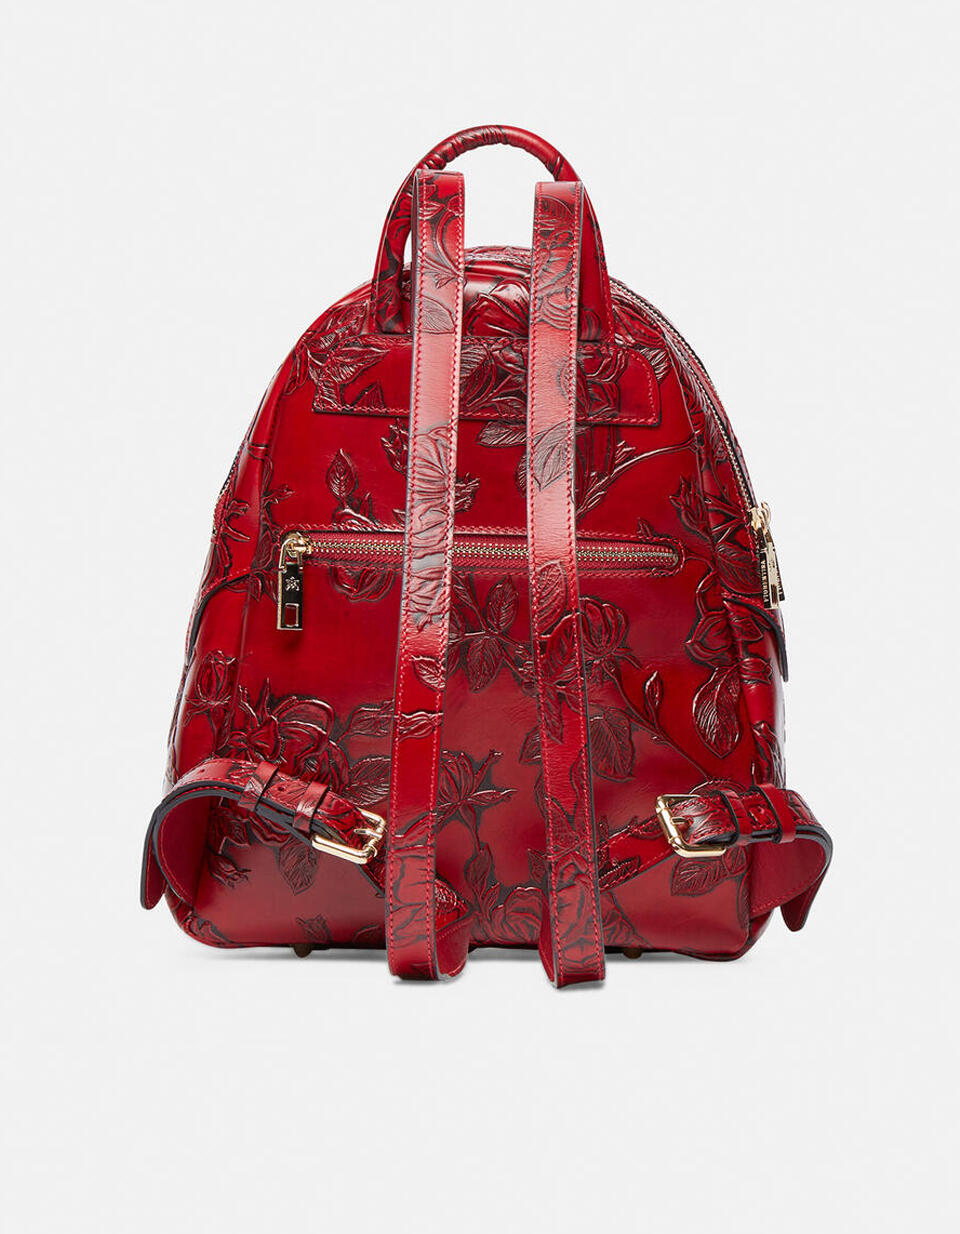 Backpack Red  - Backpacks - Women's Bags - Bags - Cuoieria Fiorentina